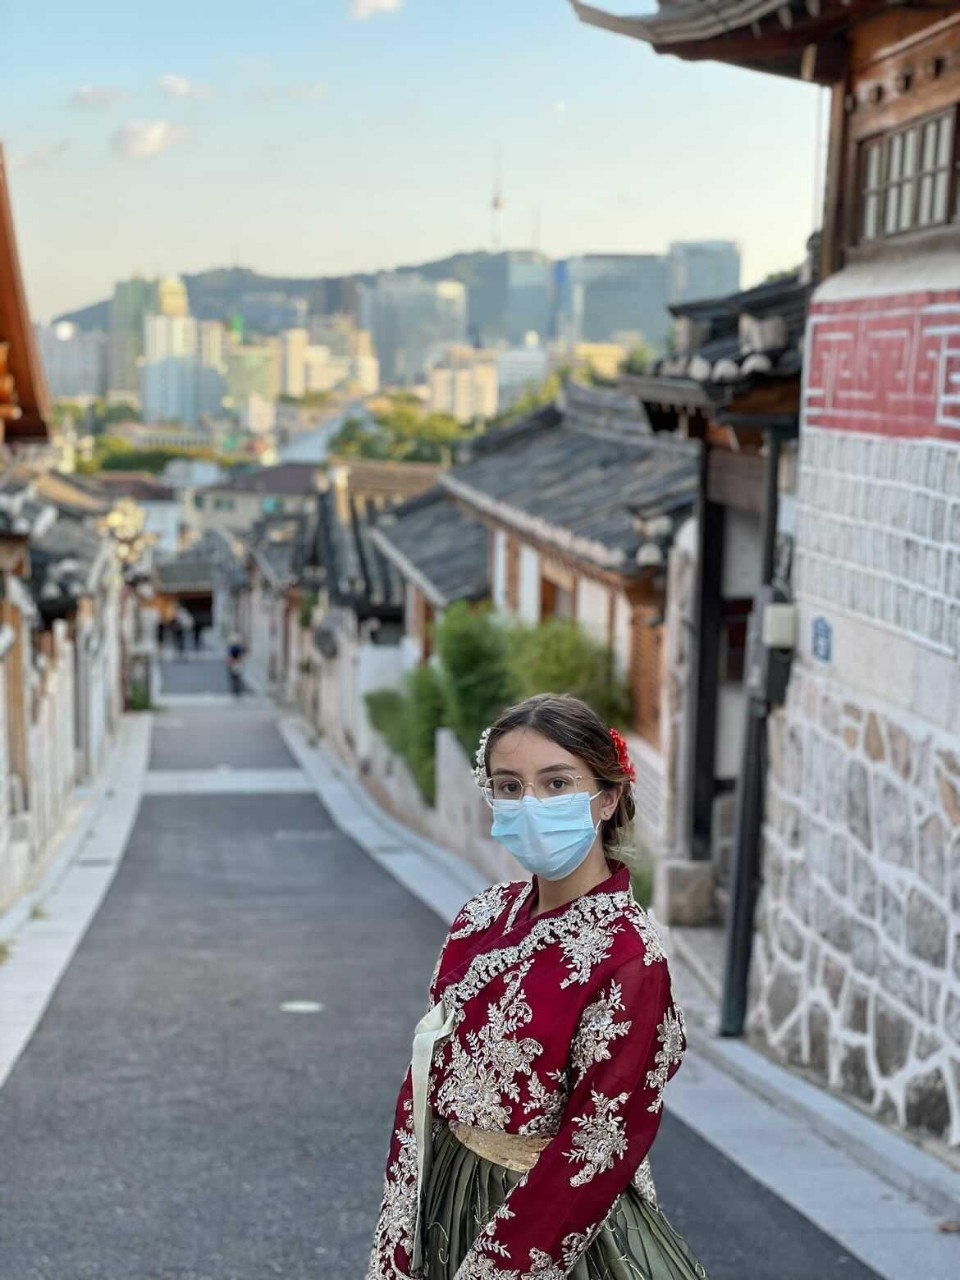 Student in traditional dress on Korean street